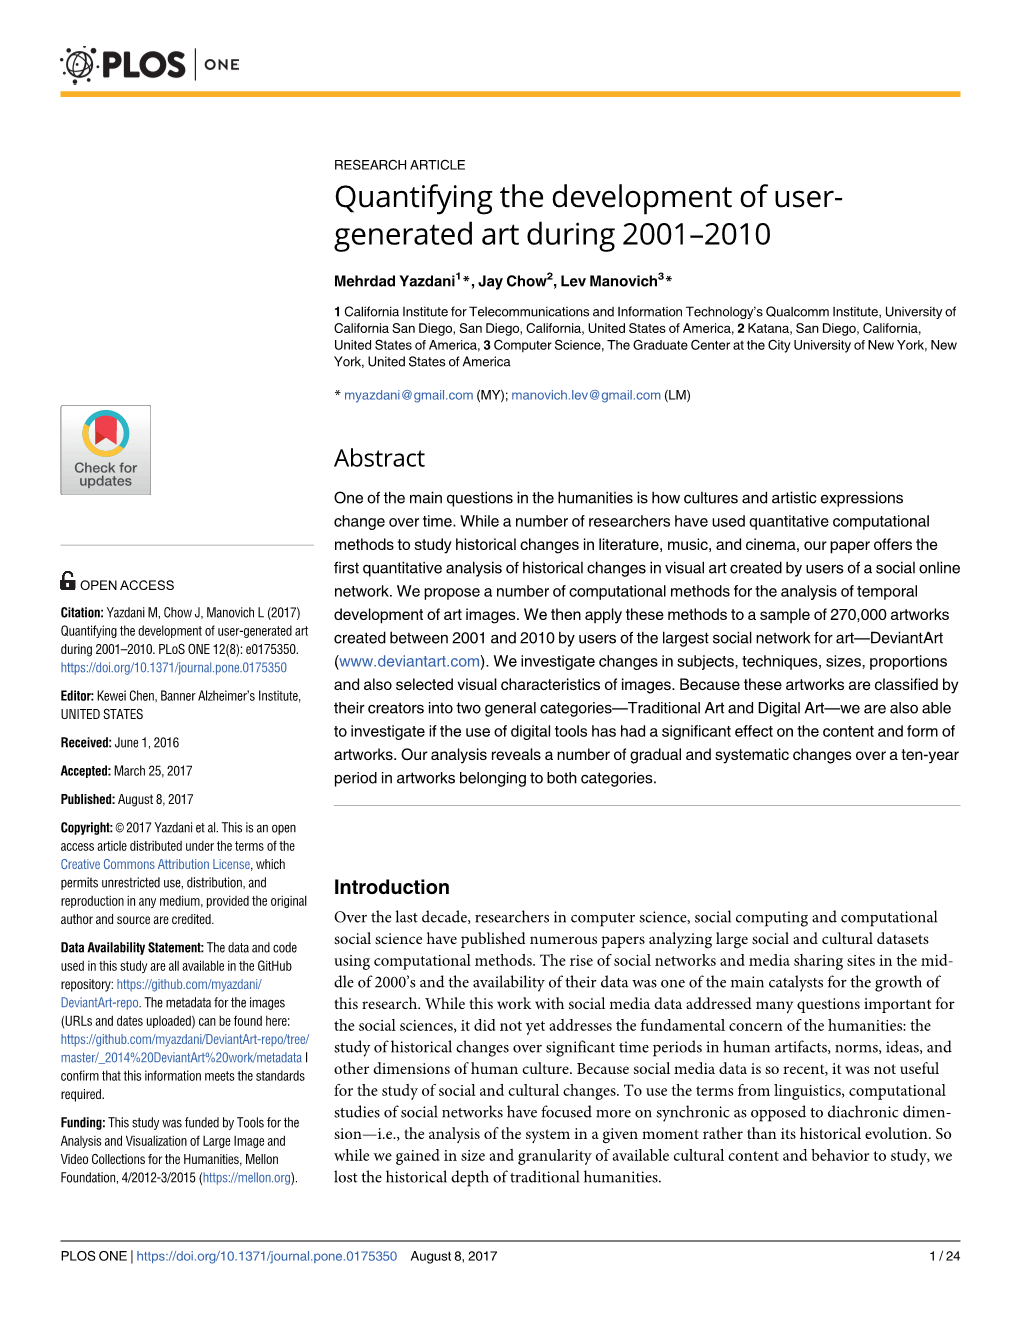 Quantifying the Development of User-Generated Art During 2001–2010